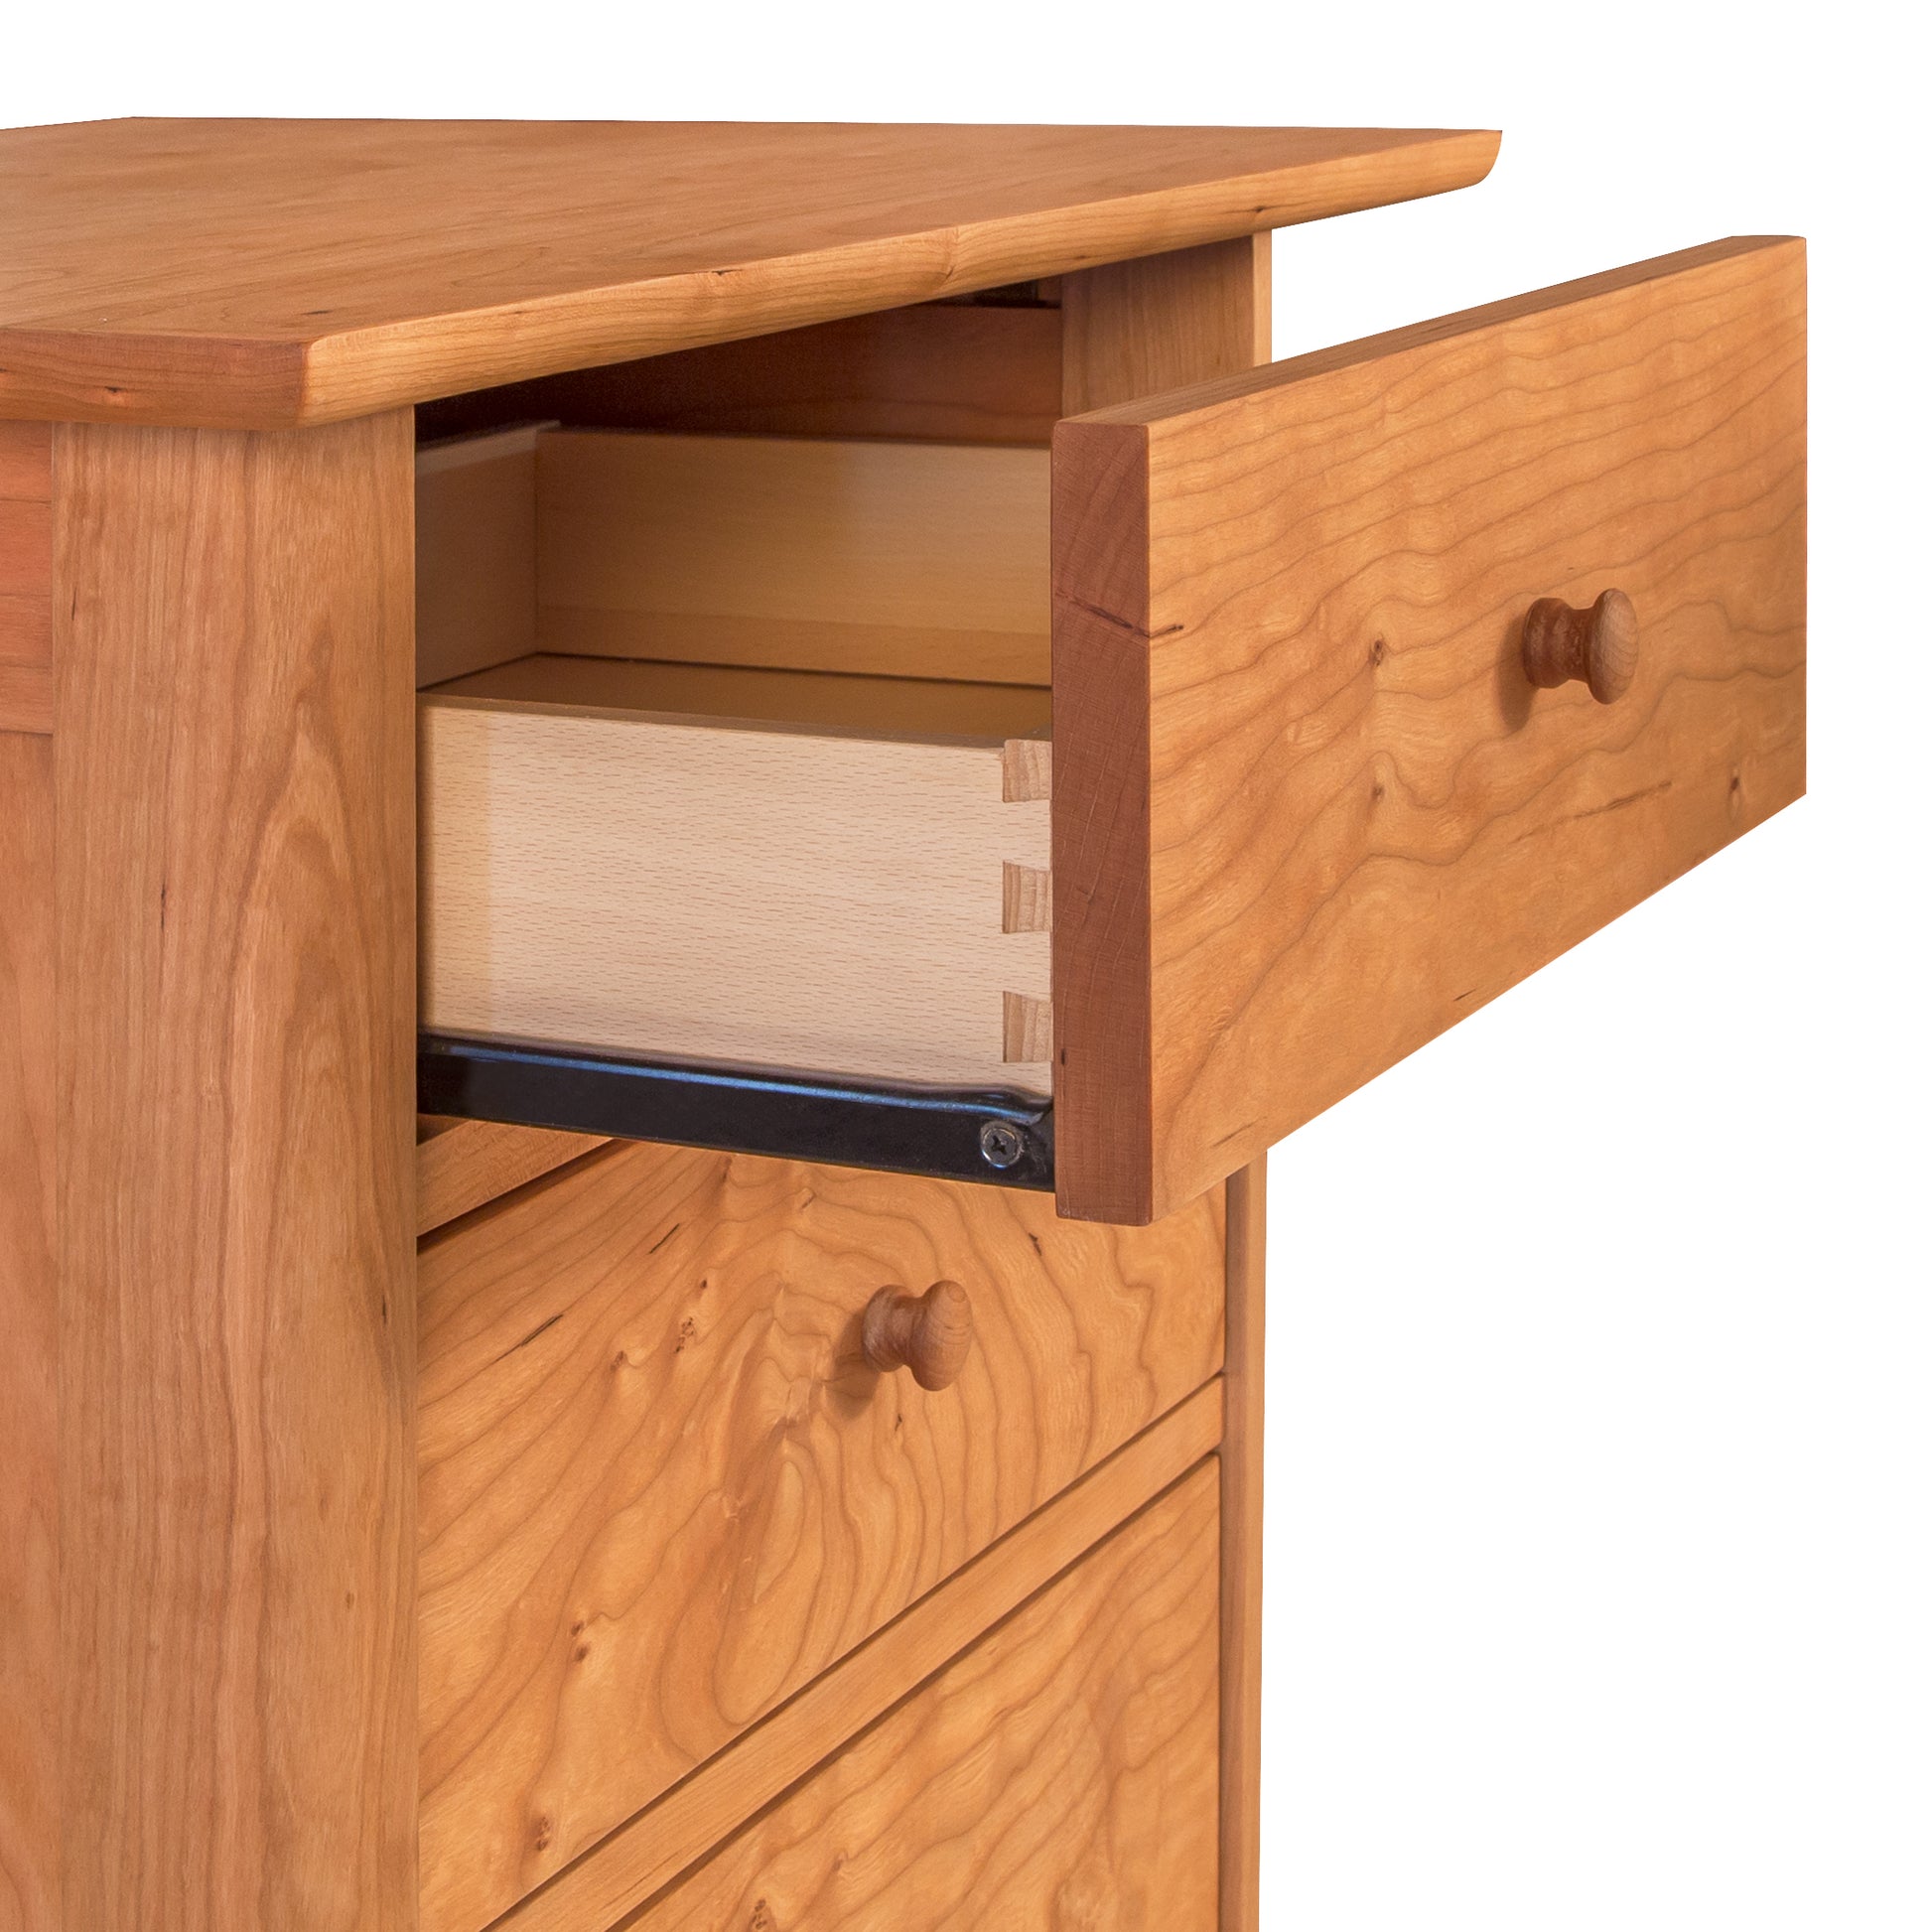 A Vermont Furniture Designs Heartwood Shaker 3-Drawer Nightstand with an open drawer, showcasing its construction and metal sliding mechanism.